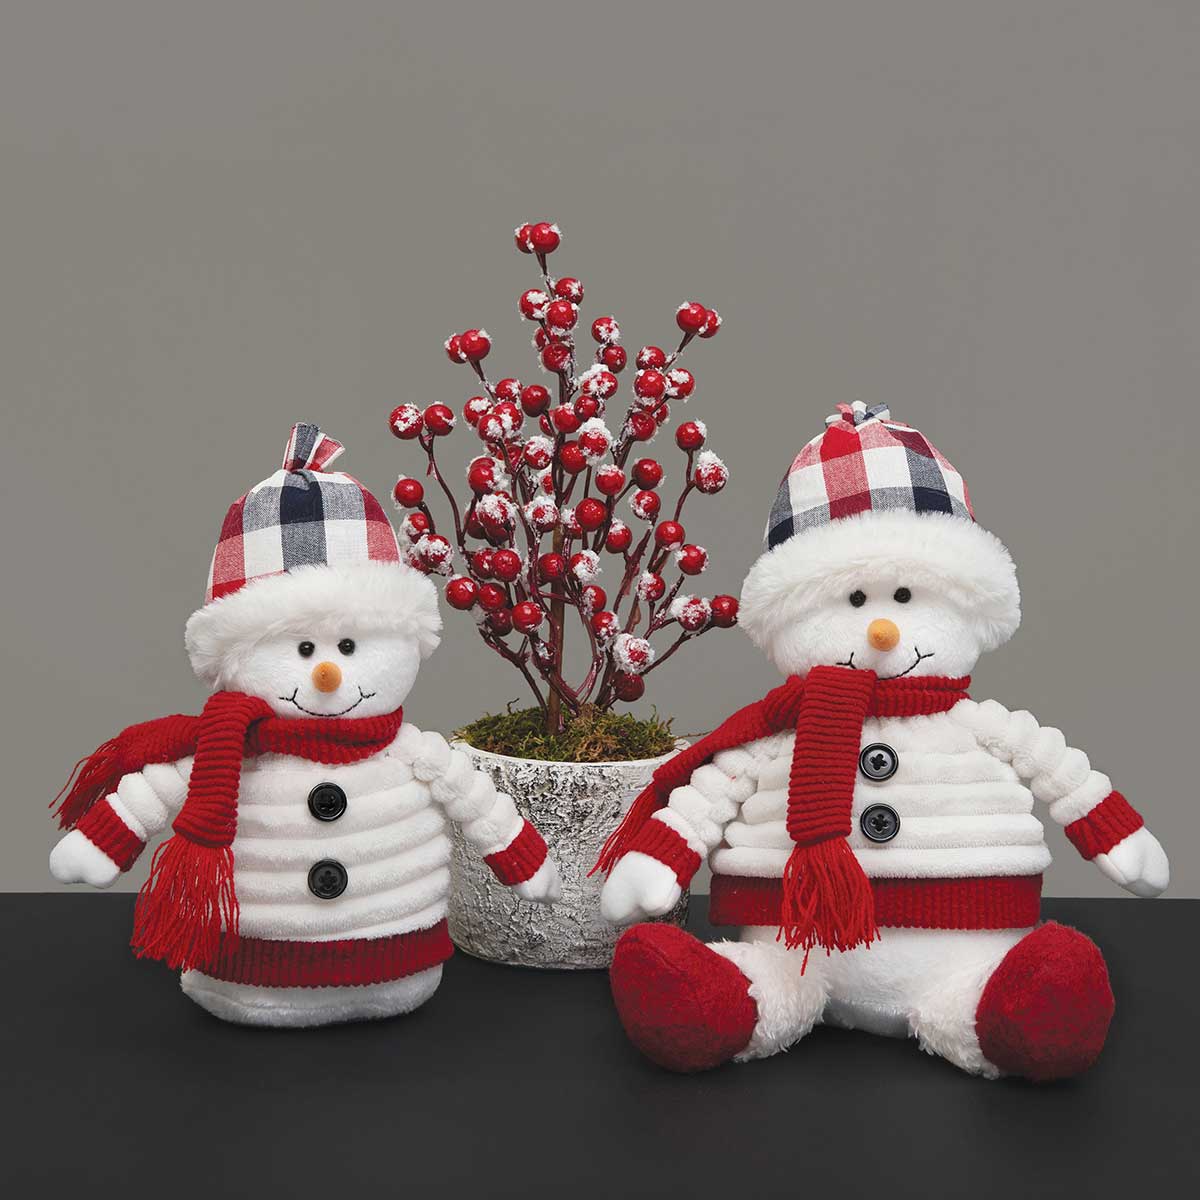 SNOWMAN WITH JACKET AND FEET 6IN X 10IN WHITE/RED